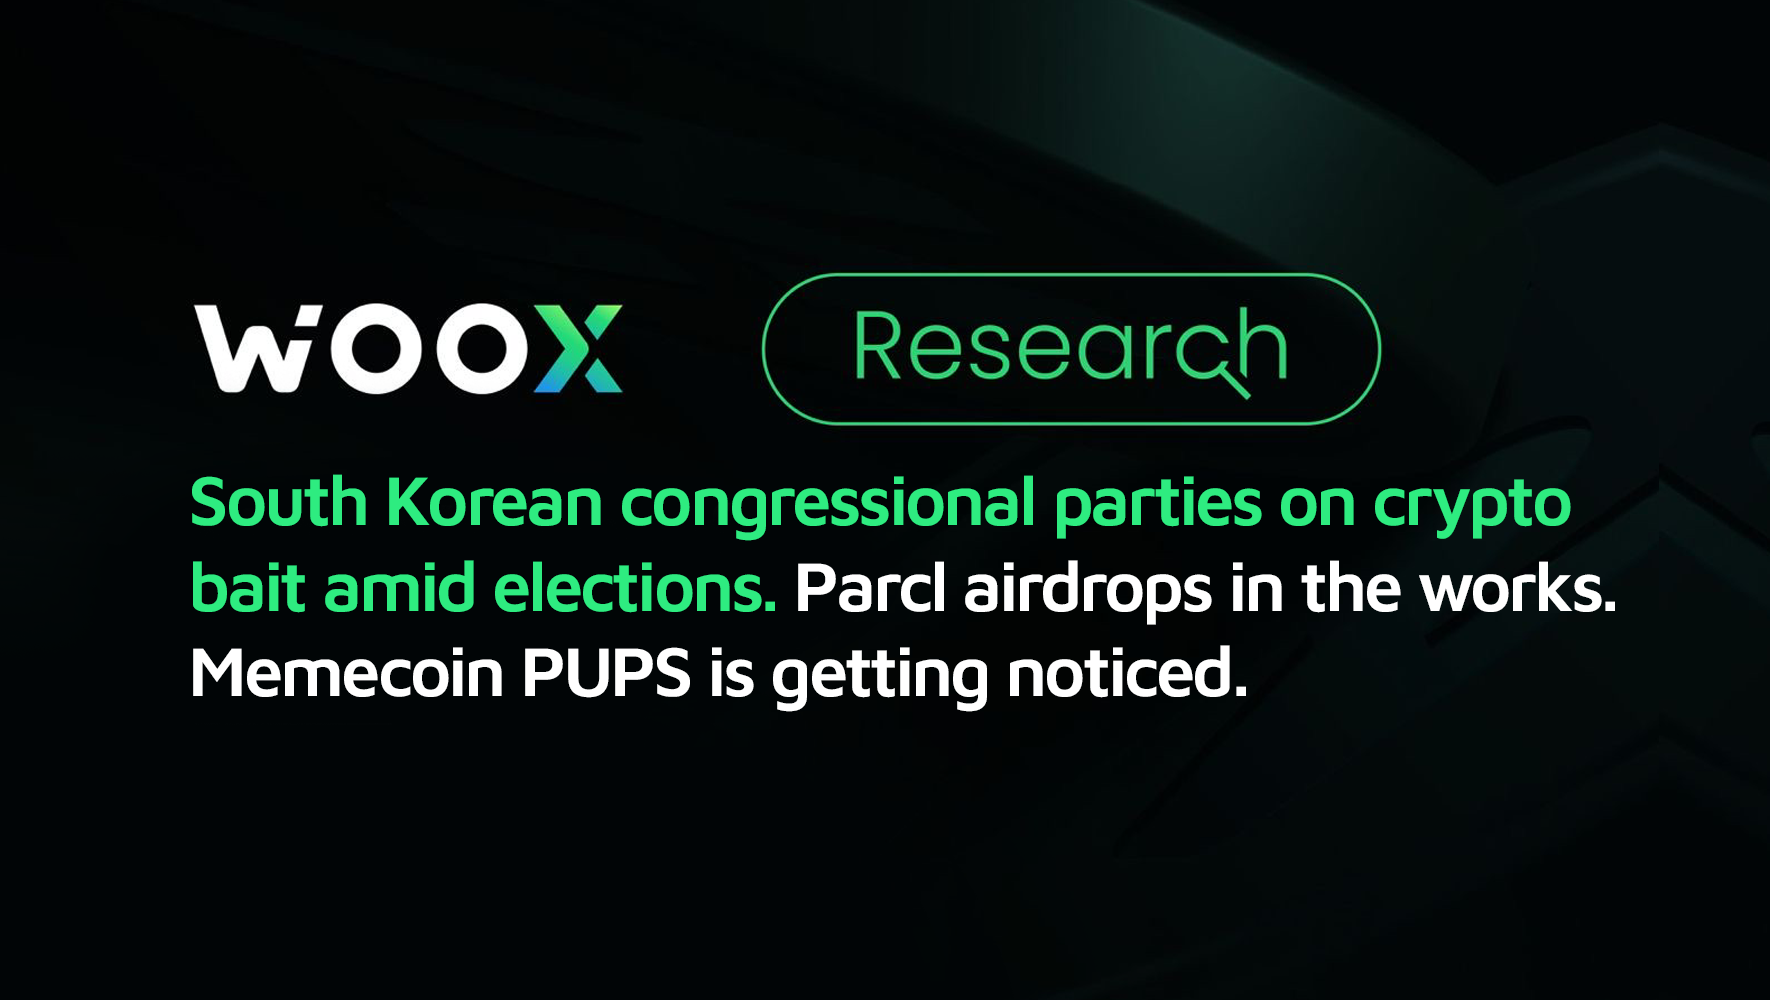 South Korean congressional parties on crypto bait amid elections